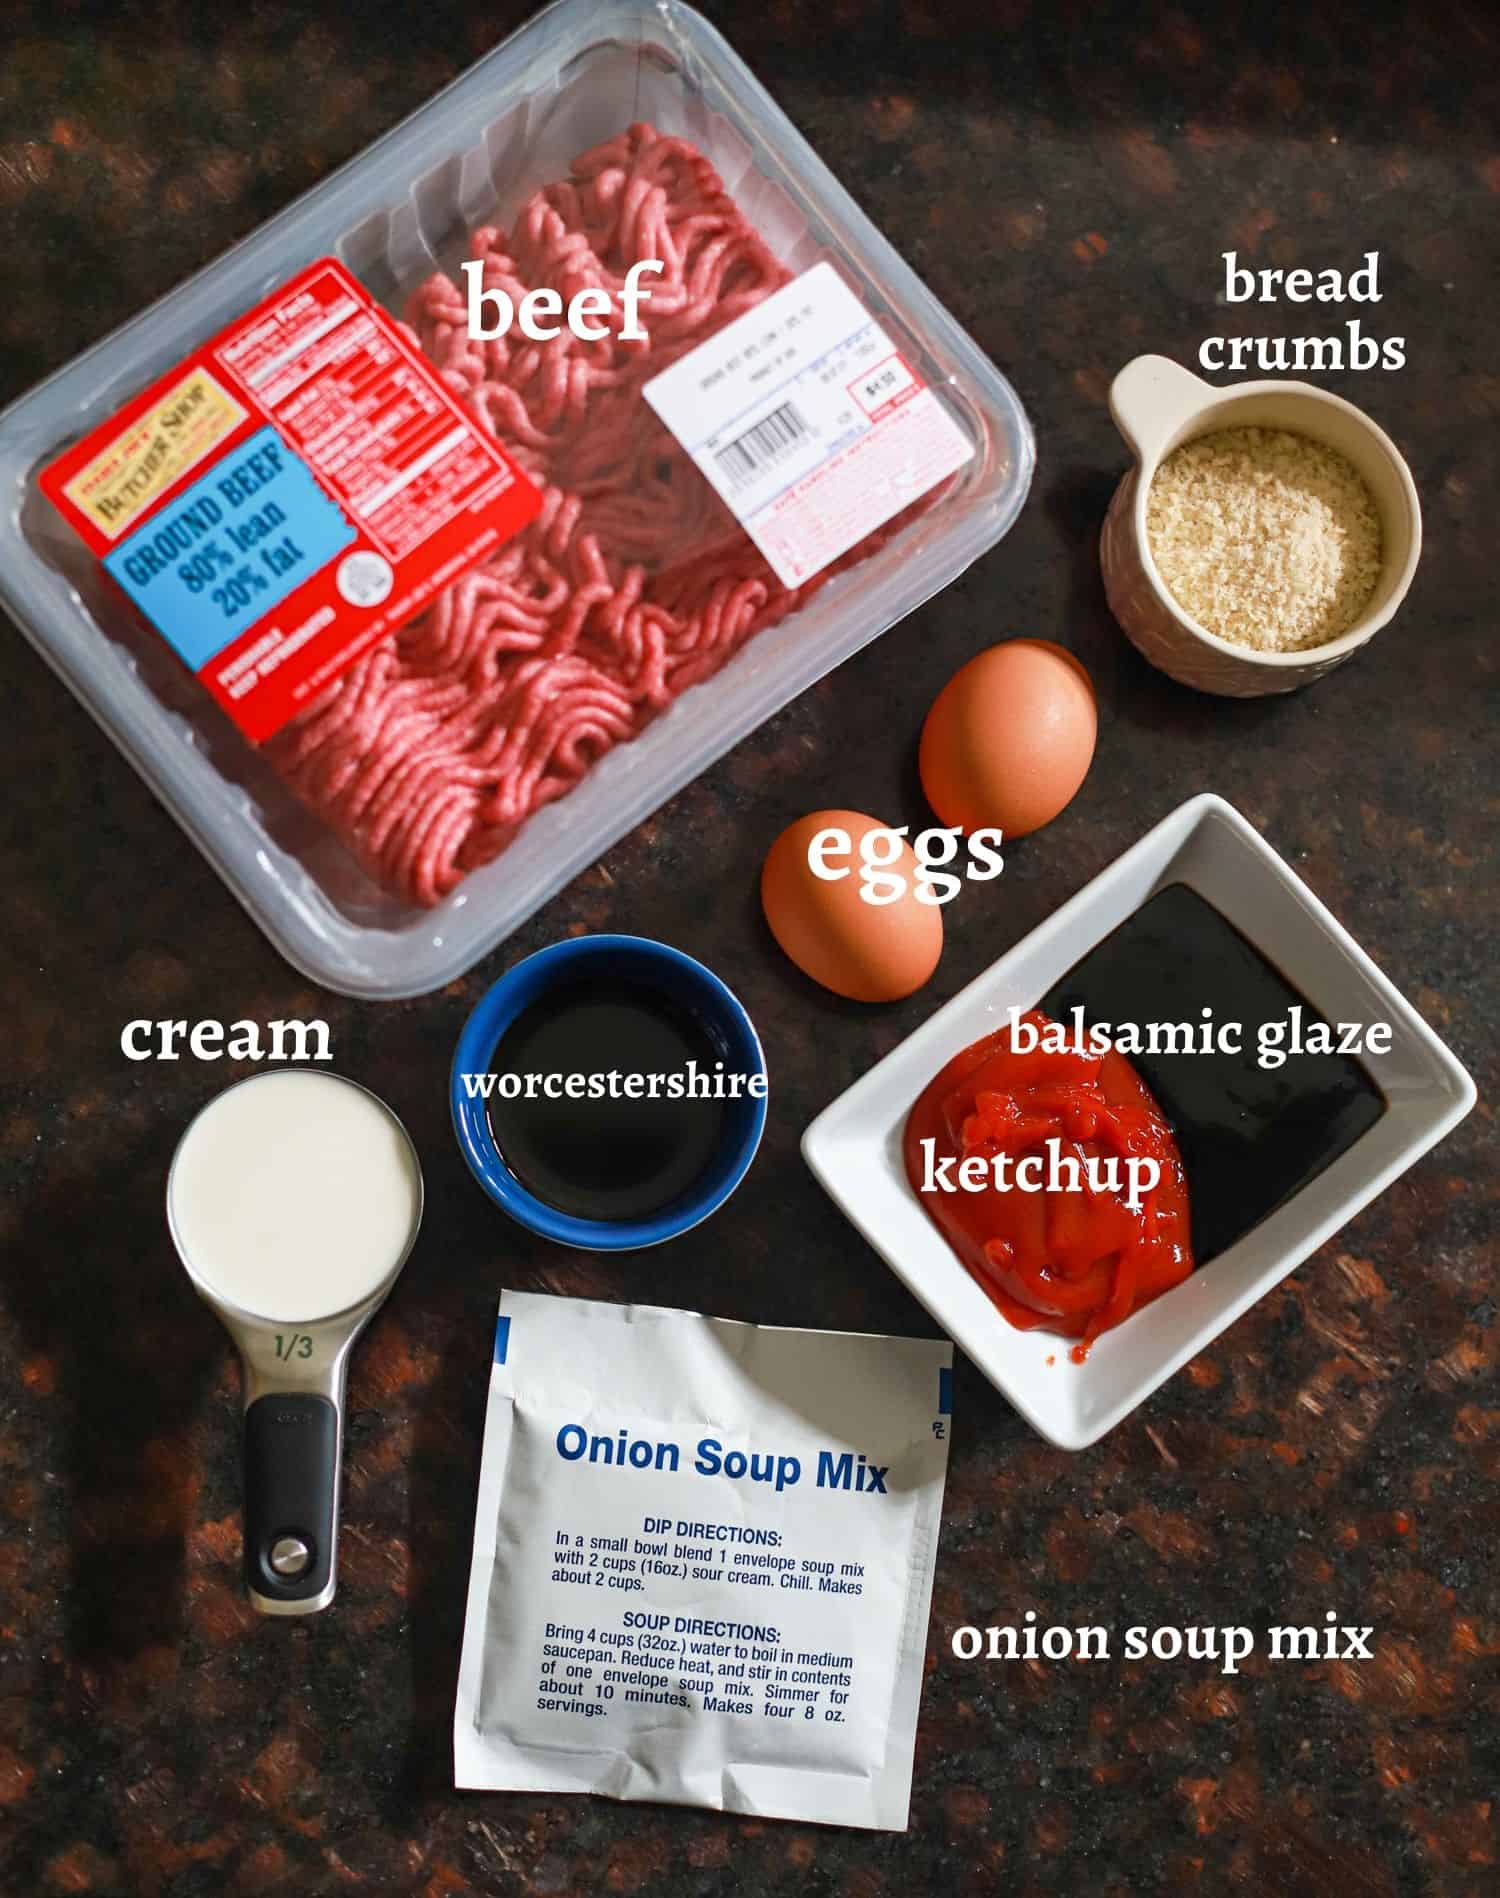 https://mytherapistcooks.com/wp-content/uploads/2022/01/Meatloaf-with-Onion-Soup-Mix-Ingredients.jpg